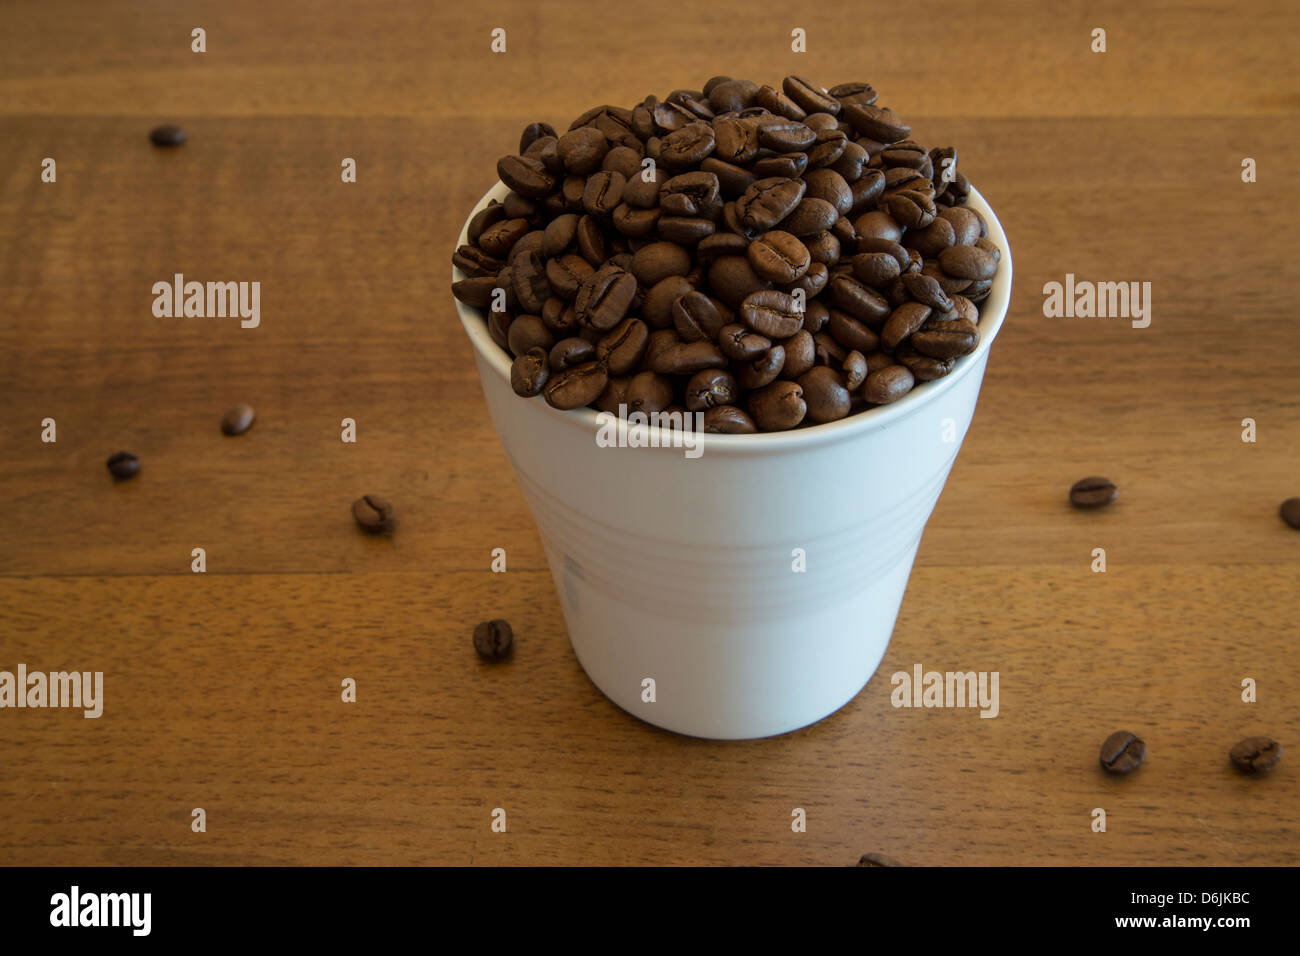 A white coffee cup filled with coffee beans. It is depicting peoples excessive intake of coffee but at the same time enticing. Stock Photo